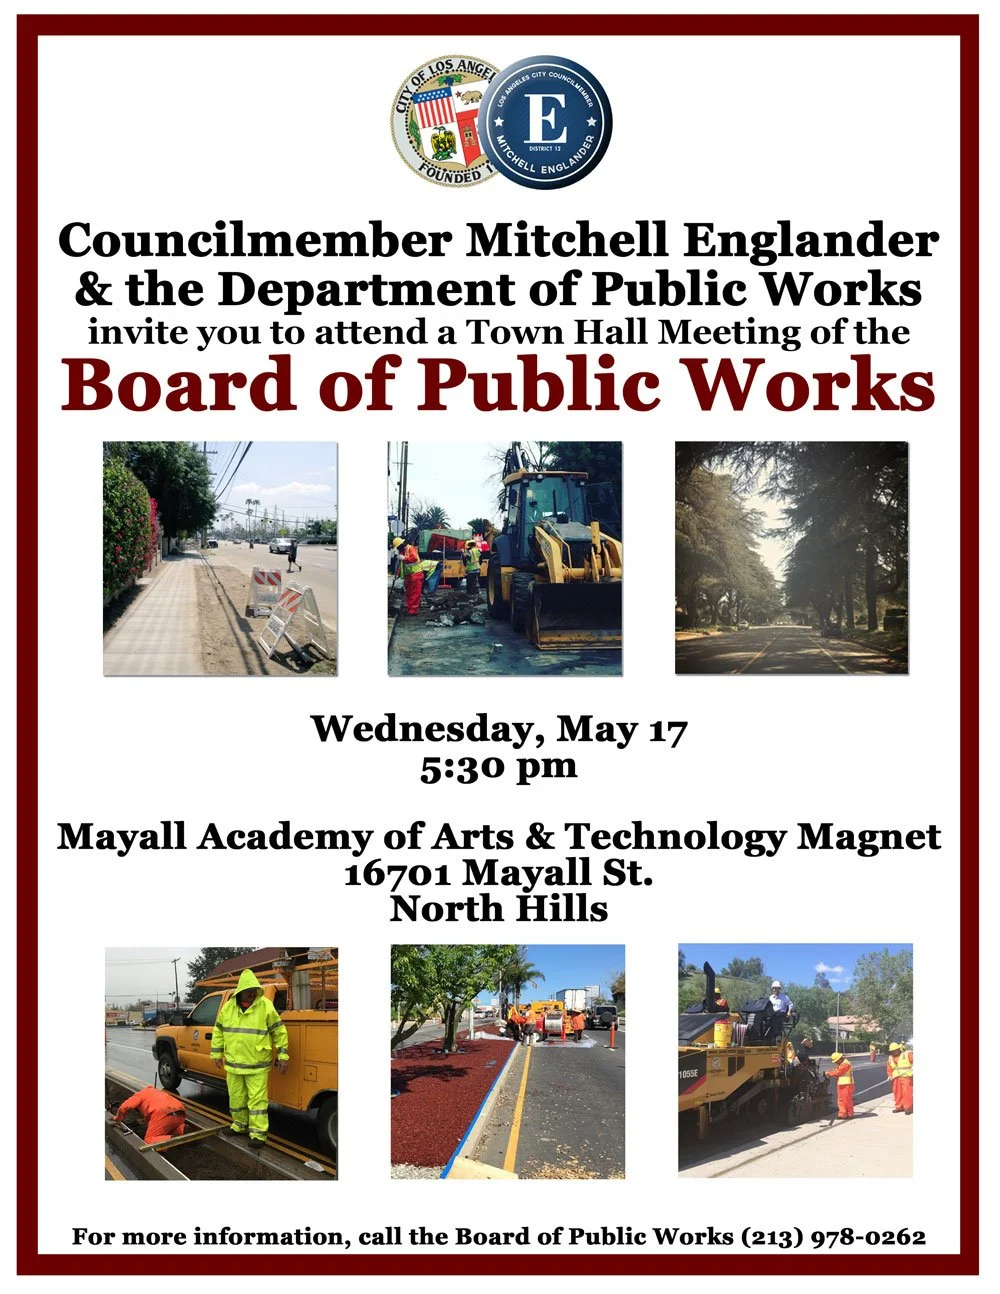 CD 12 Board of Public Works Town Hall